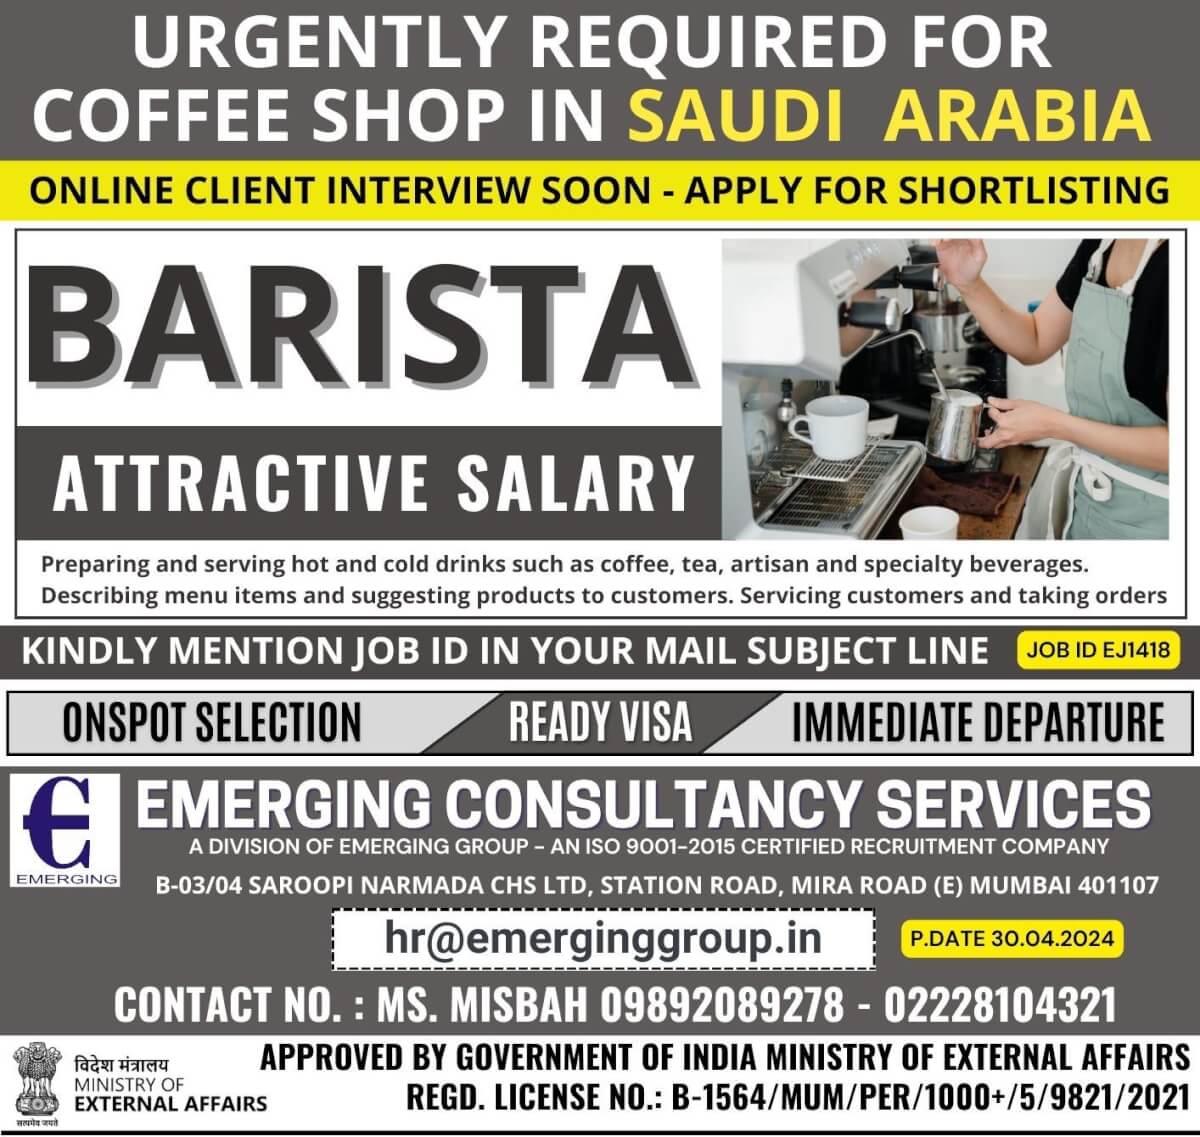 URGENTLY REQUIRED FOR COFFEE SHOP IN SAUDI ARABIA